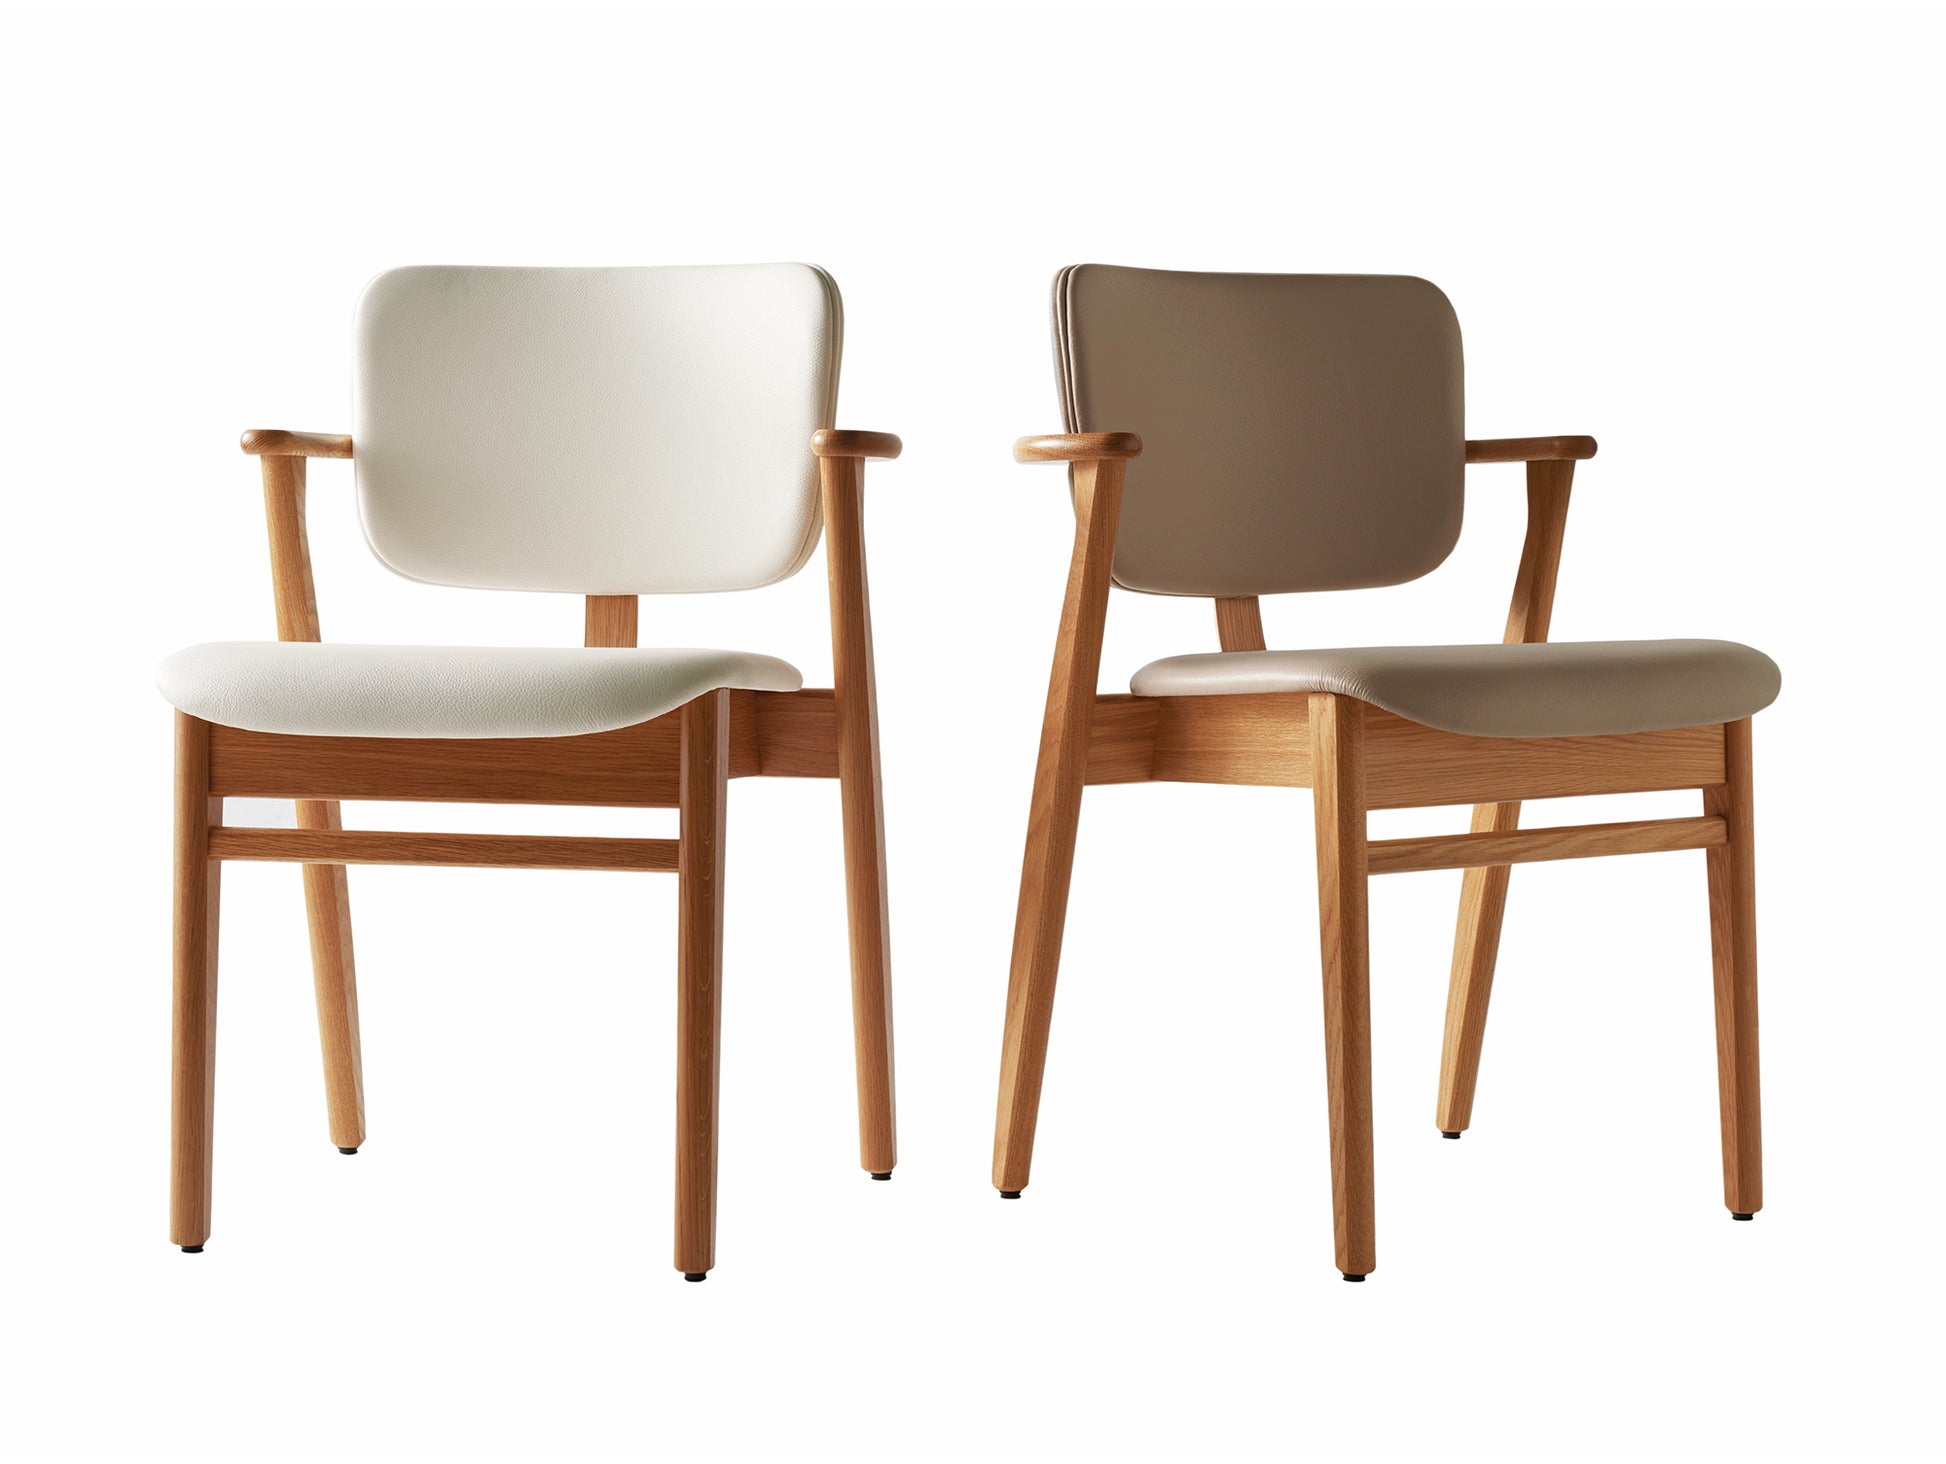 Domus Chair Upholstered by Artek - Frame: Lacquered Birch / Seat and Back: White and Beige Prestige Leather